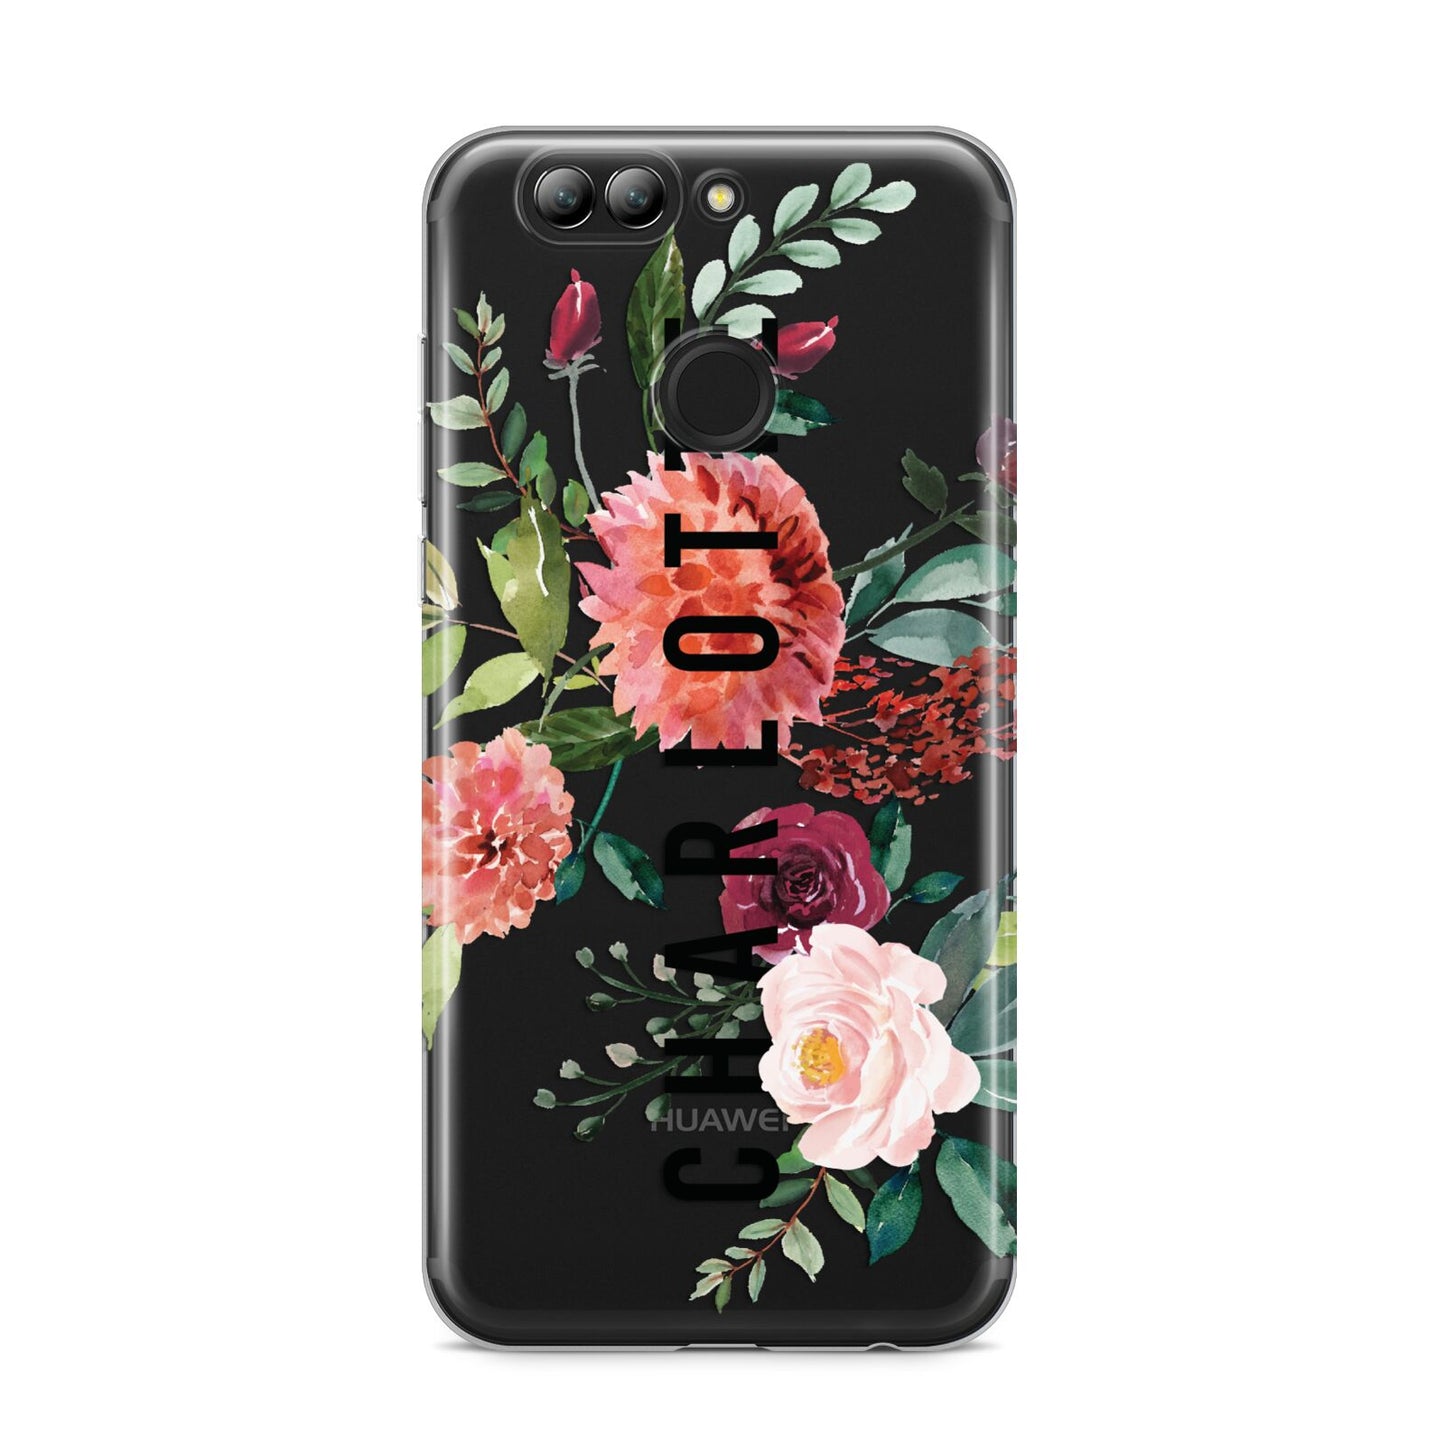 Personalised Side Name Clear Floral Huawei Nova 2s Phone Case